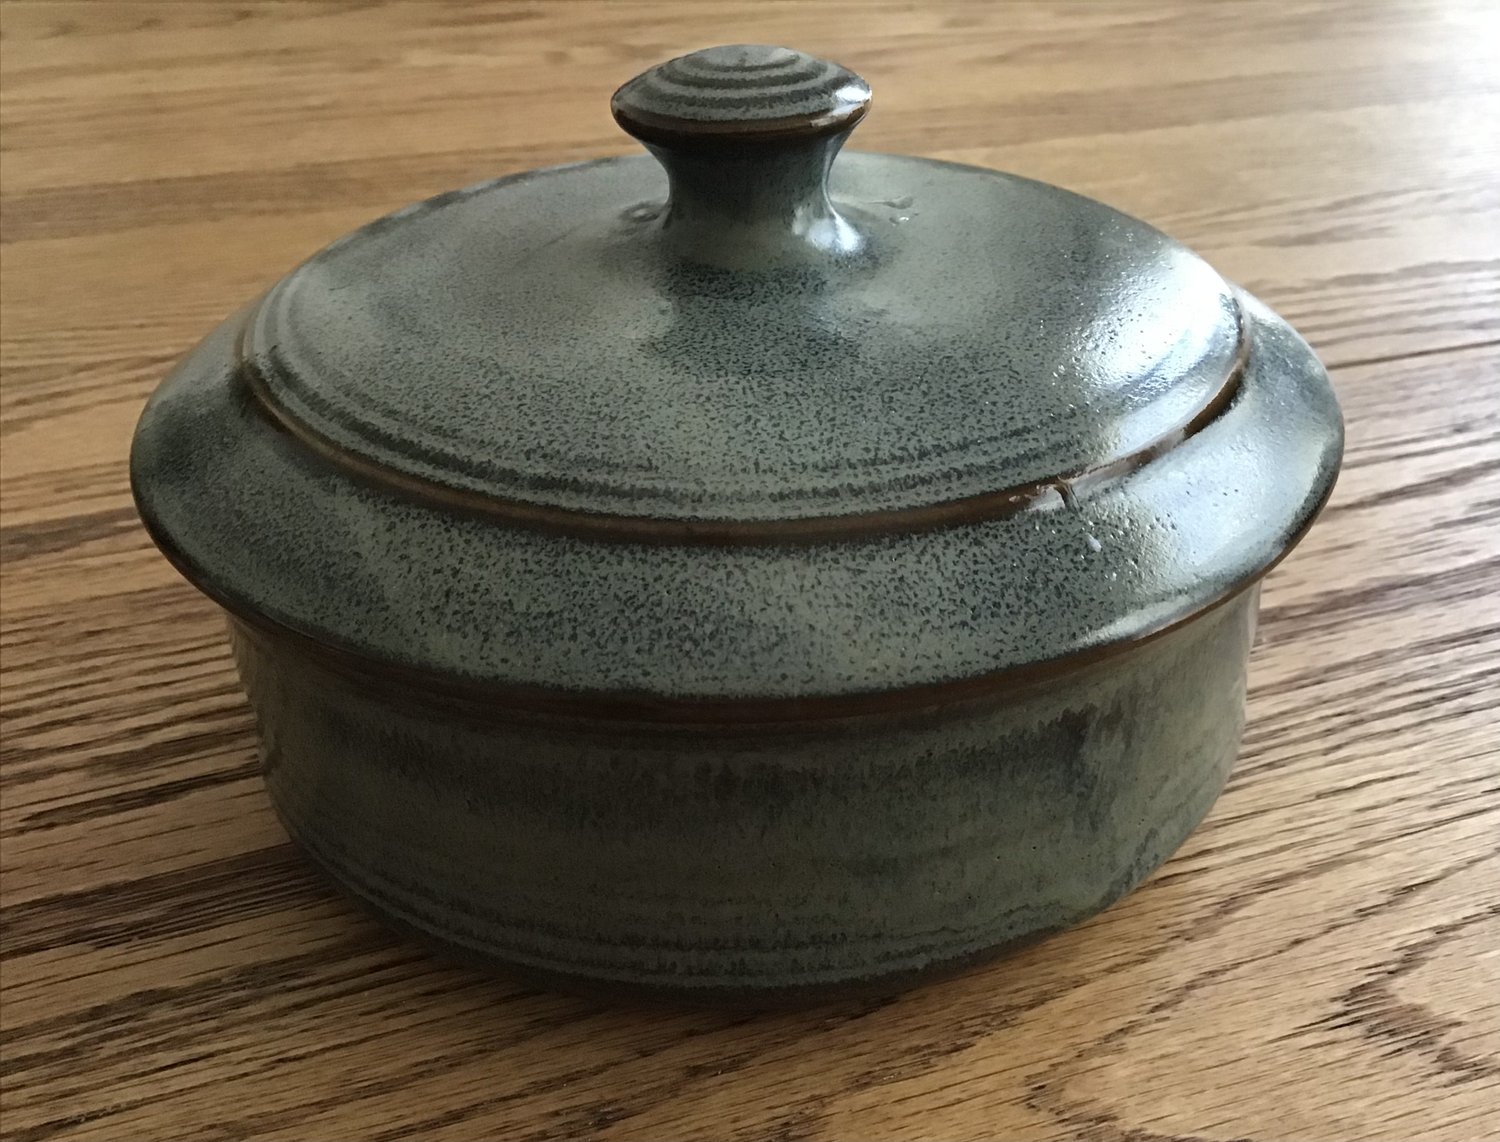 Vintage Stoneware Studio Pottery Pot with Lid and Handle Casserole Dish